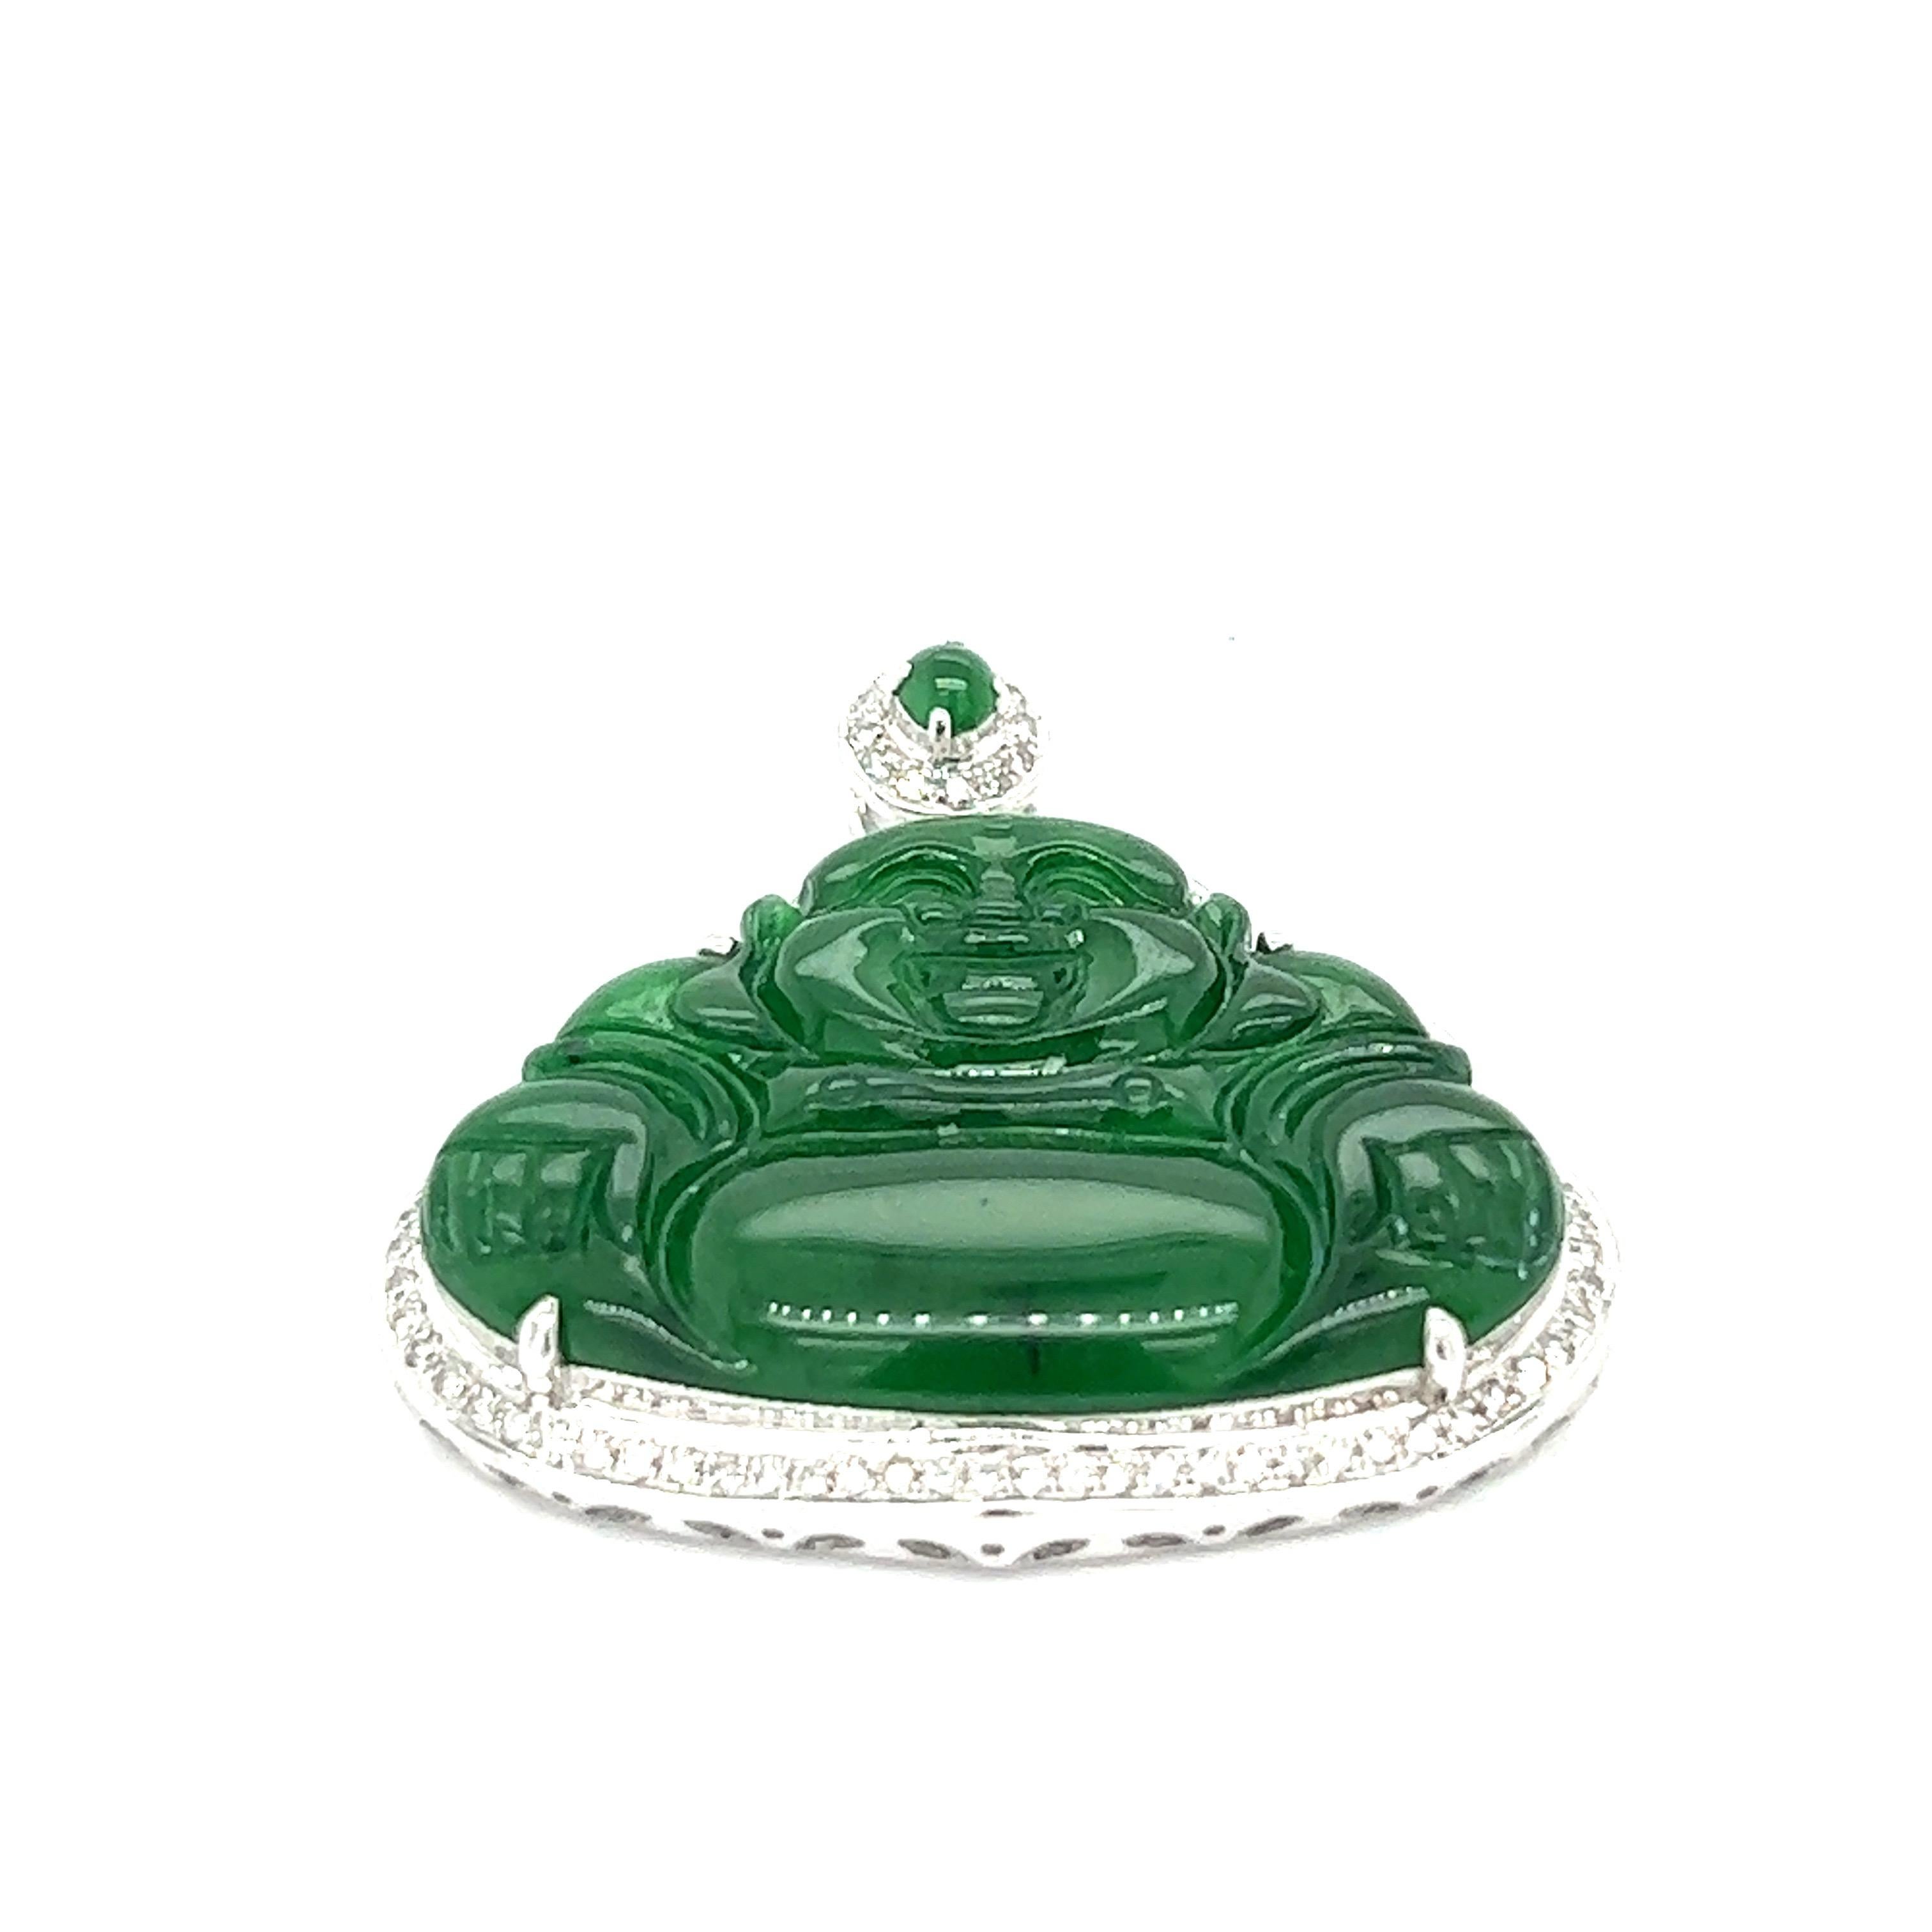 Jadeite Jade Buddha 18k White Gold Pendant

A carving of Buddha made of natural jadeite jade with no dye or impregnation detected, surrounded by round and single-cut diamonds, set on 18 karat white gold. Comes with Mason-Kay certificate.

Size: